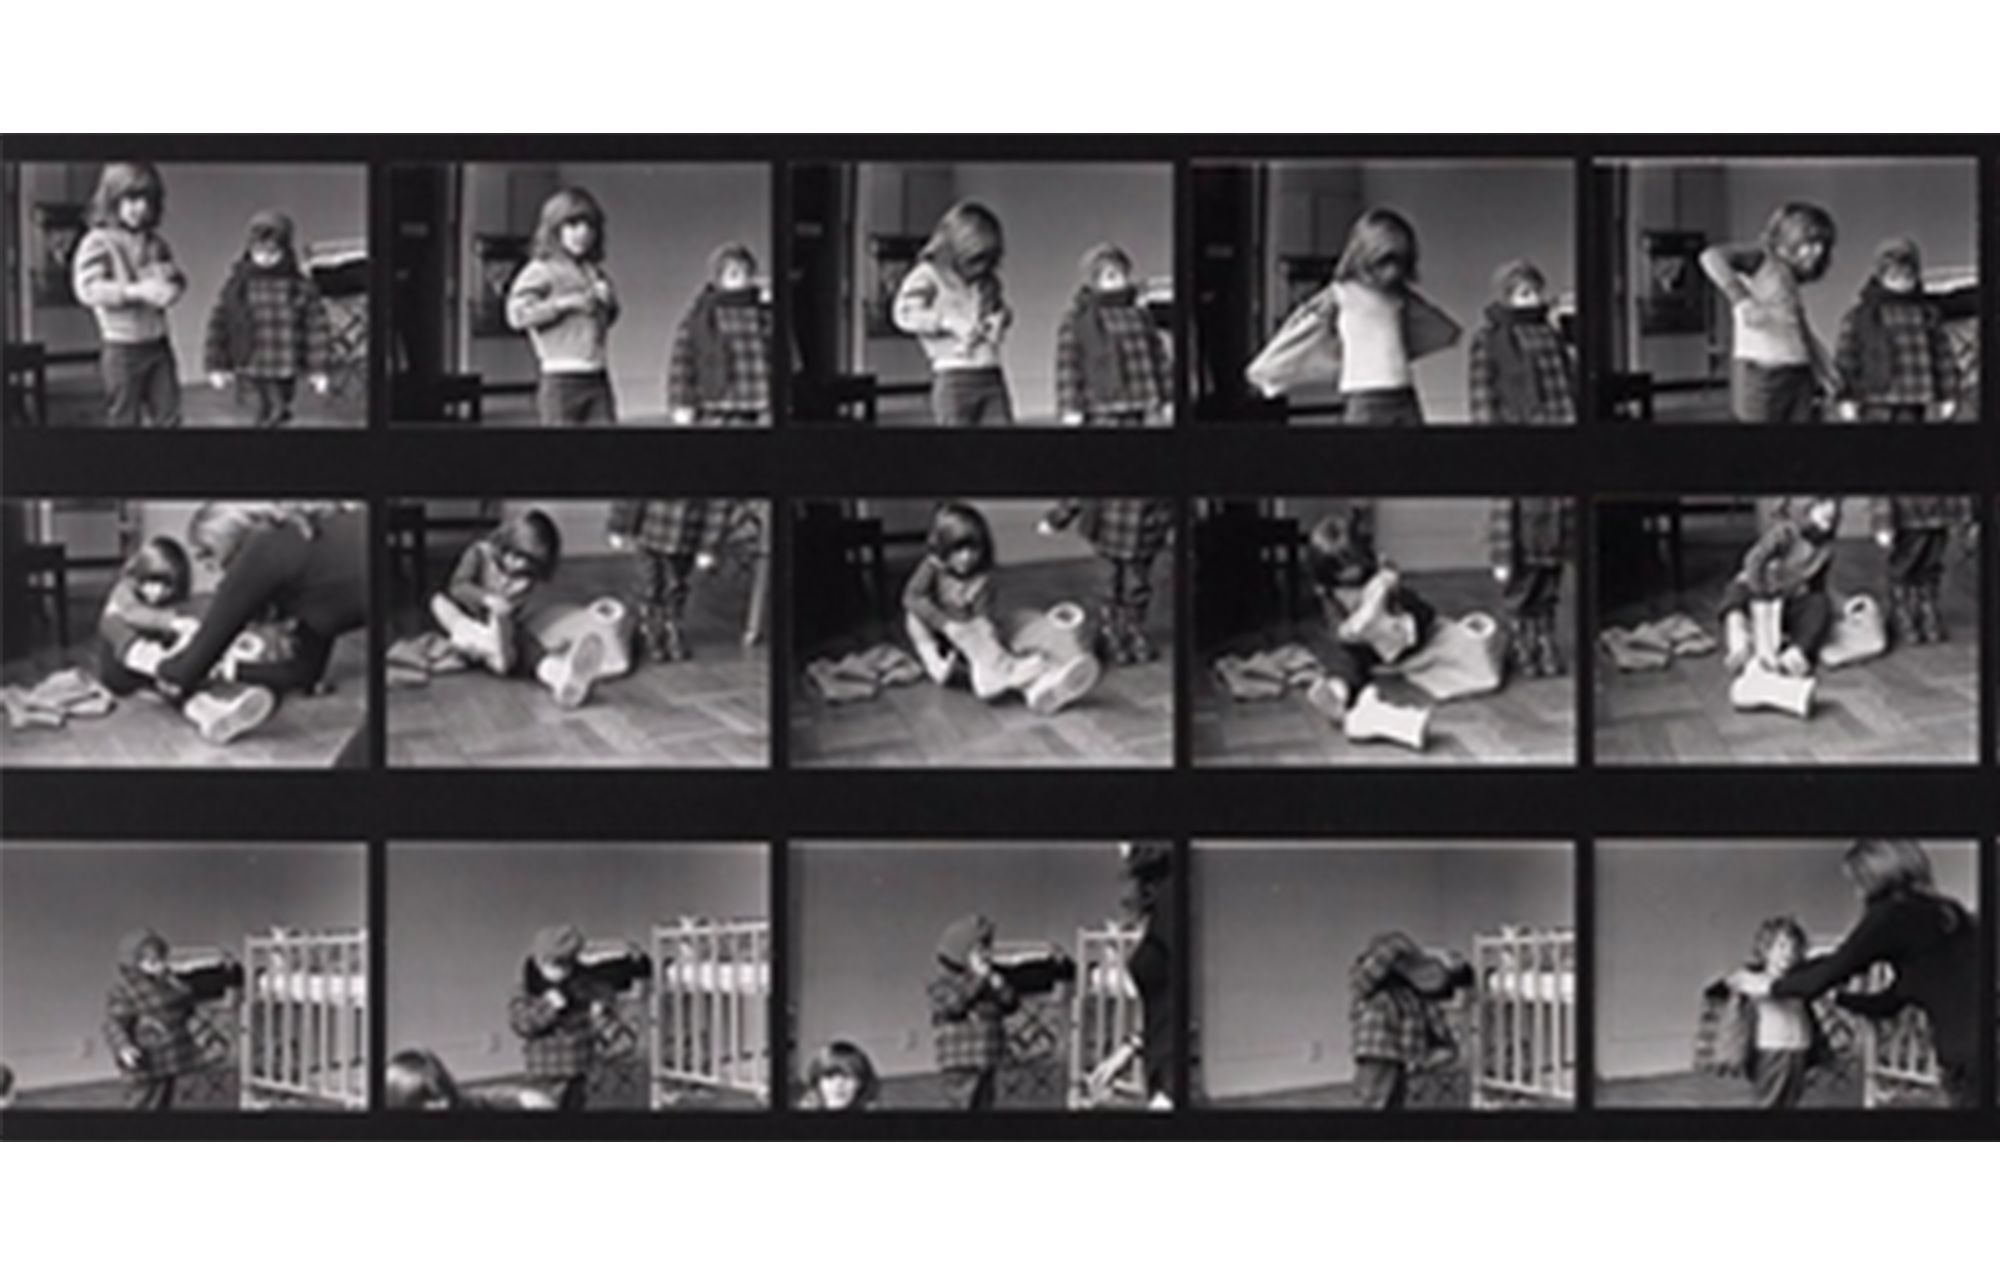 three rows of five black and white images depicting two small children getting dressed and putting on shoes; in the bottom right image, a woman reaches out to help one of the children with their jacket